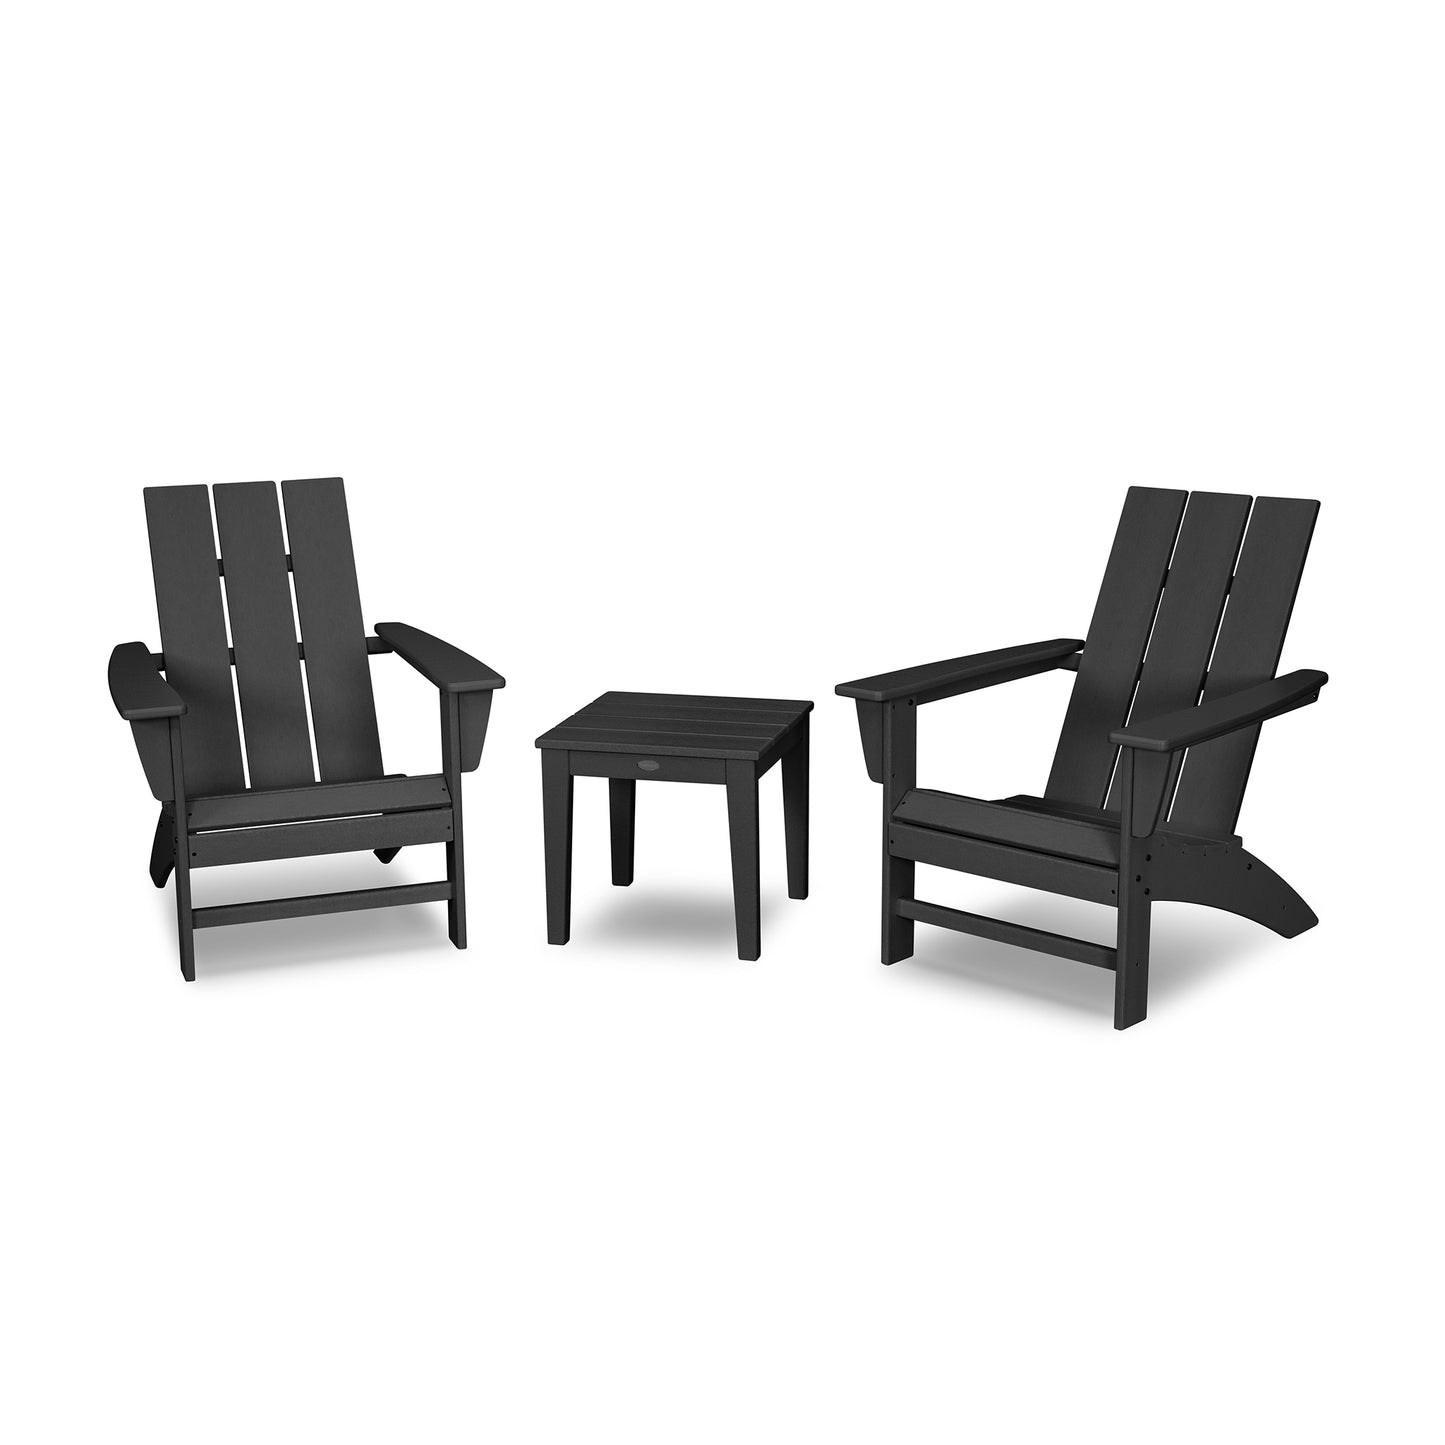 Two black POLYWOOD Modern Adirondack chairs with a matching small square table positioned between them on a plain white background. The chairs feature a classic slatted design with wide armrests, made from durable